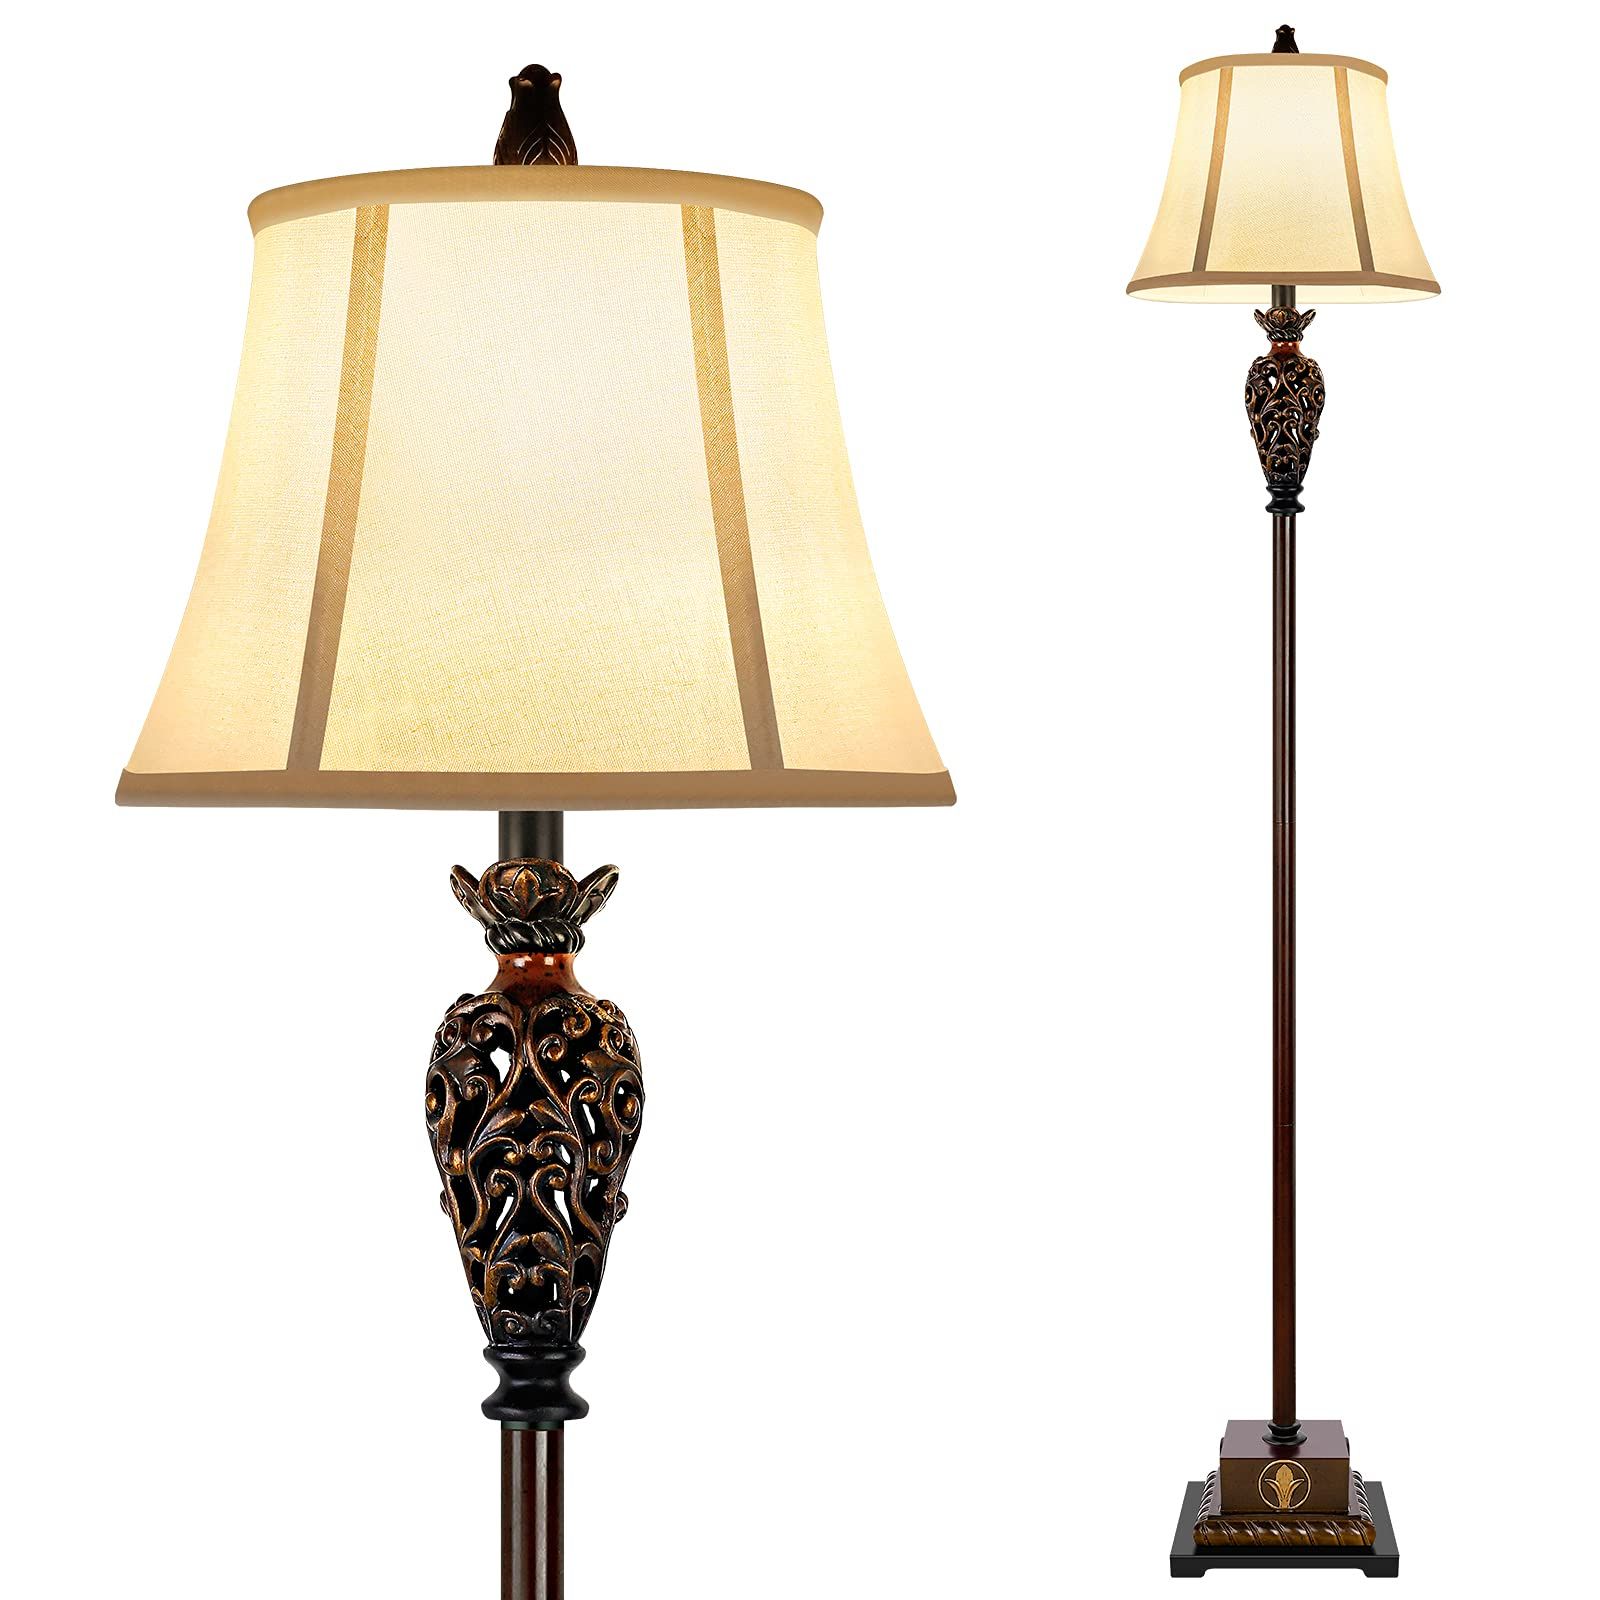 Most Recent Traditional Standing Lamps Pertaining To Traditional Floor Lamp For Living Room – Classic Standing Lamp With White  Bell Shaped Fabric Shade, Wooden (View 7 of 10)